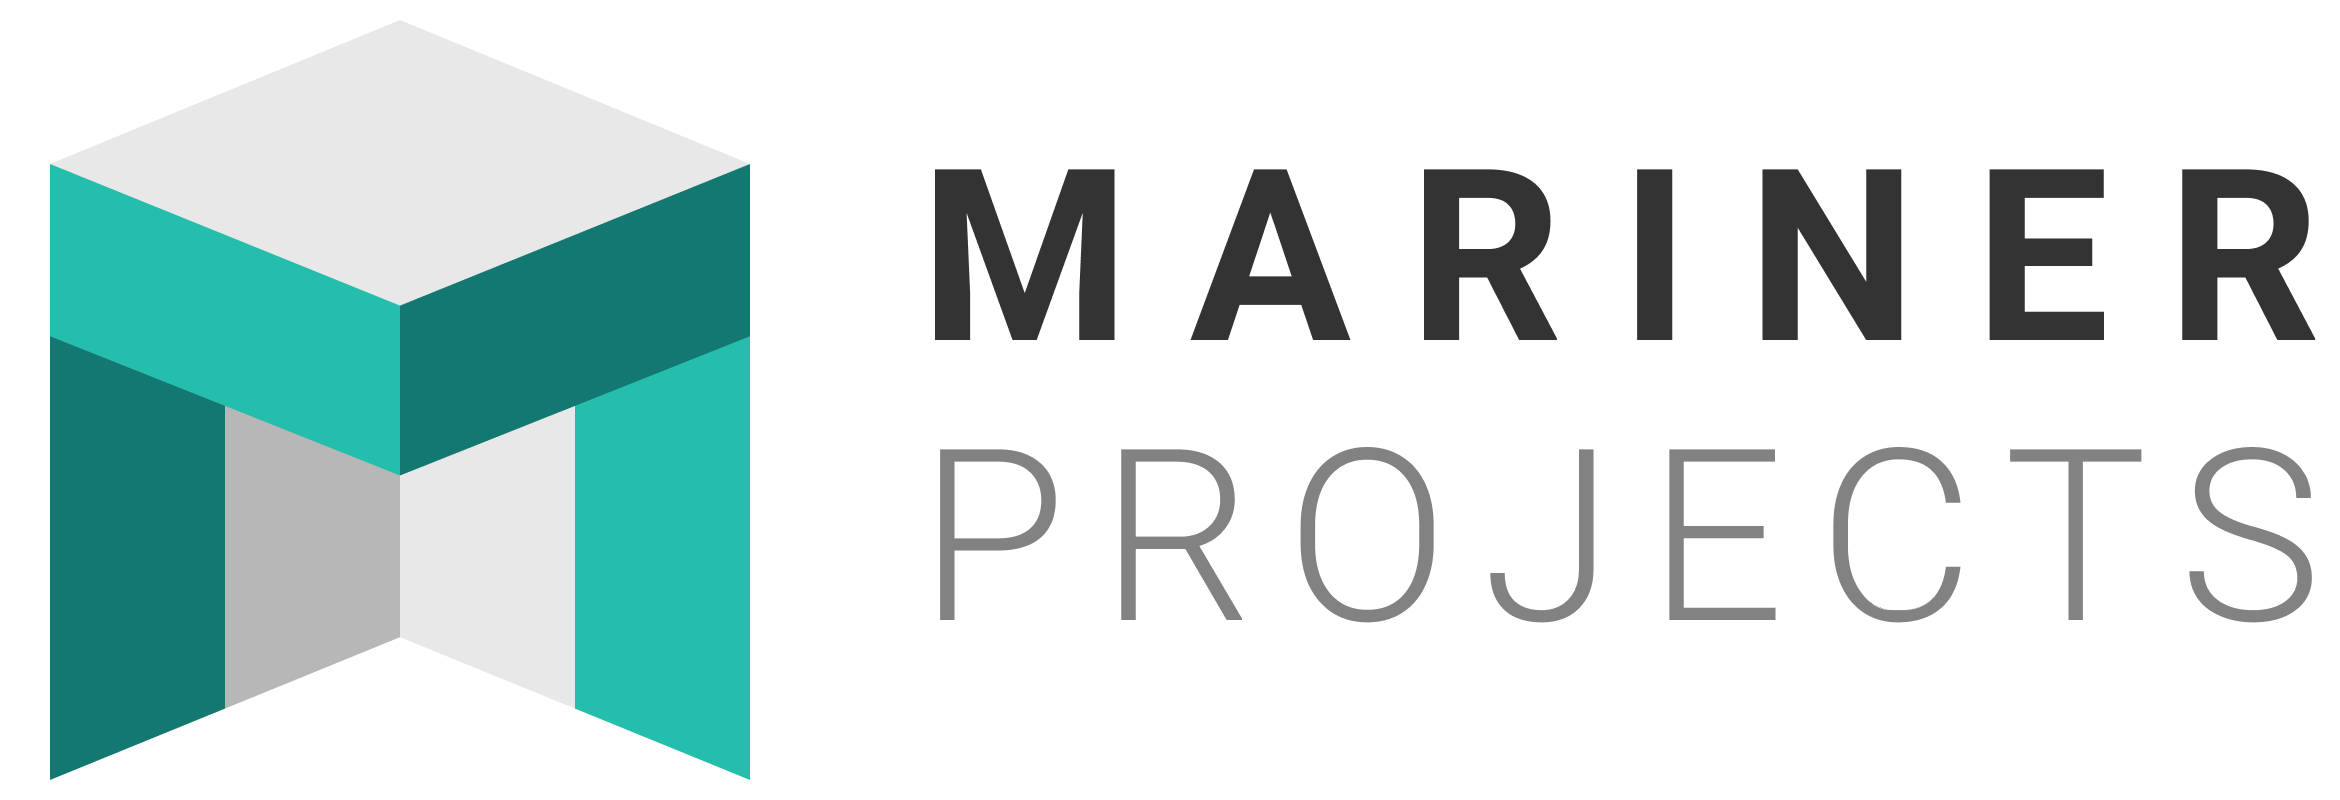 Mariner Projects.